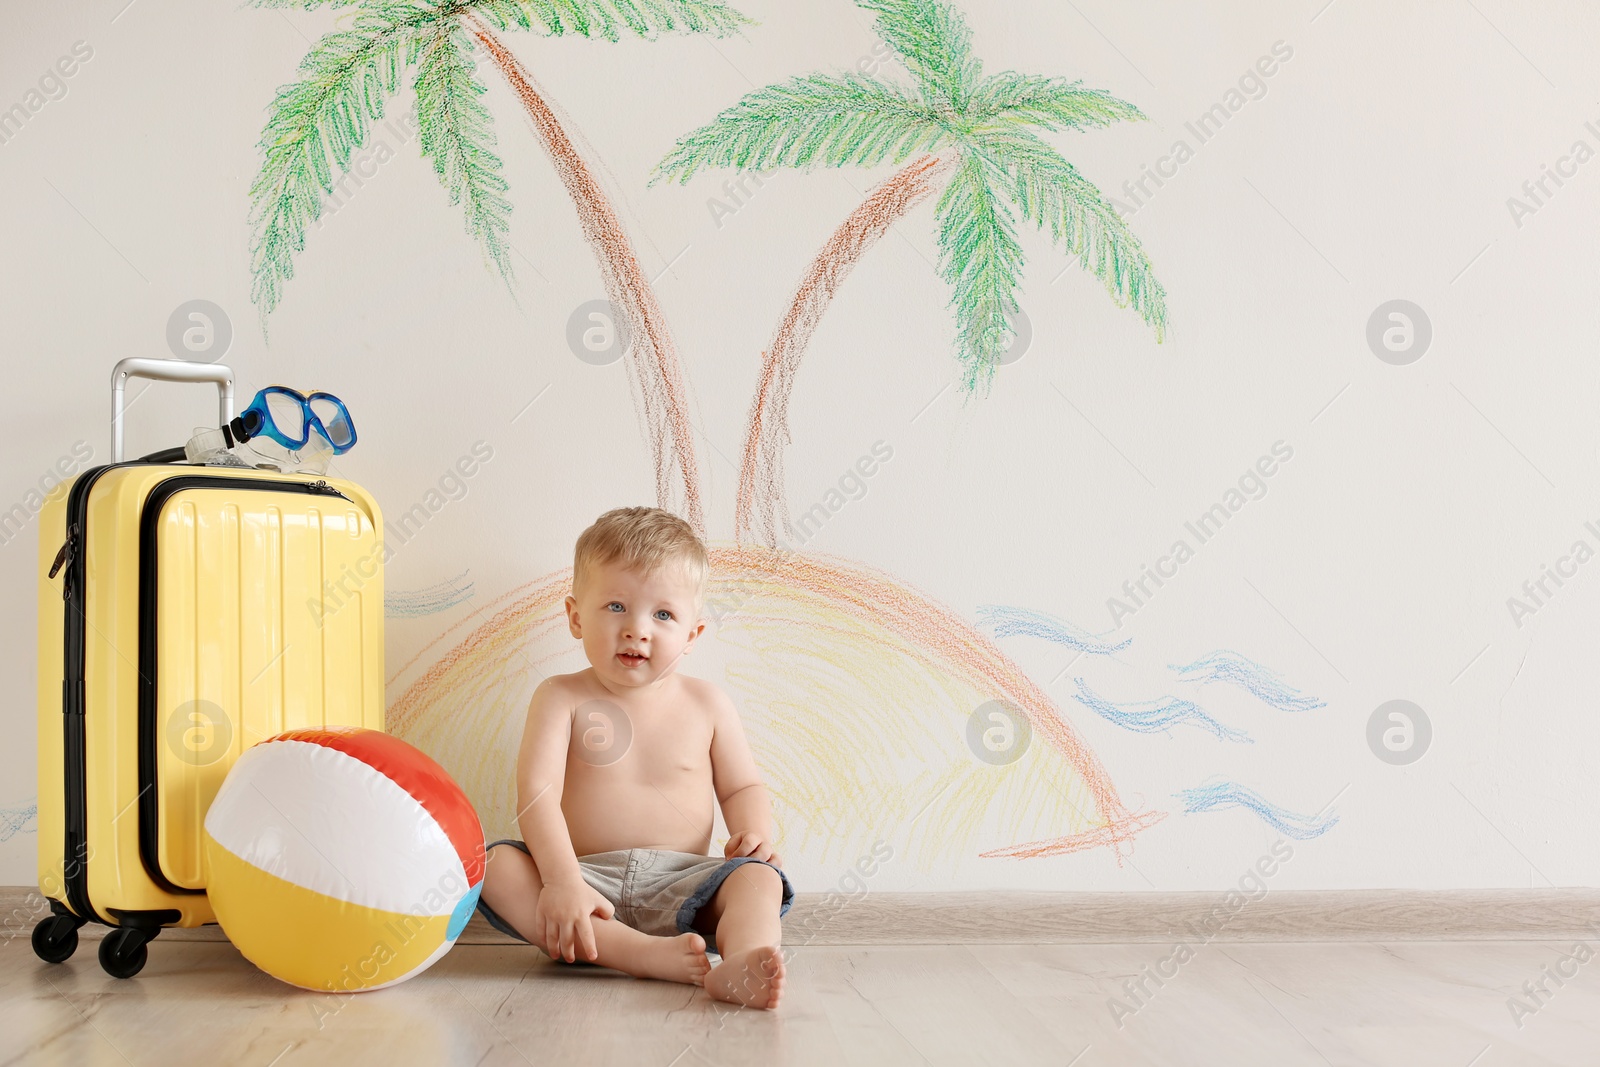 Photo of Adorable little child playing traveler with suitcase indoors